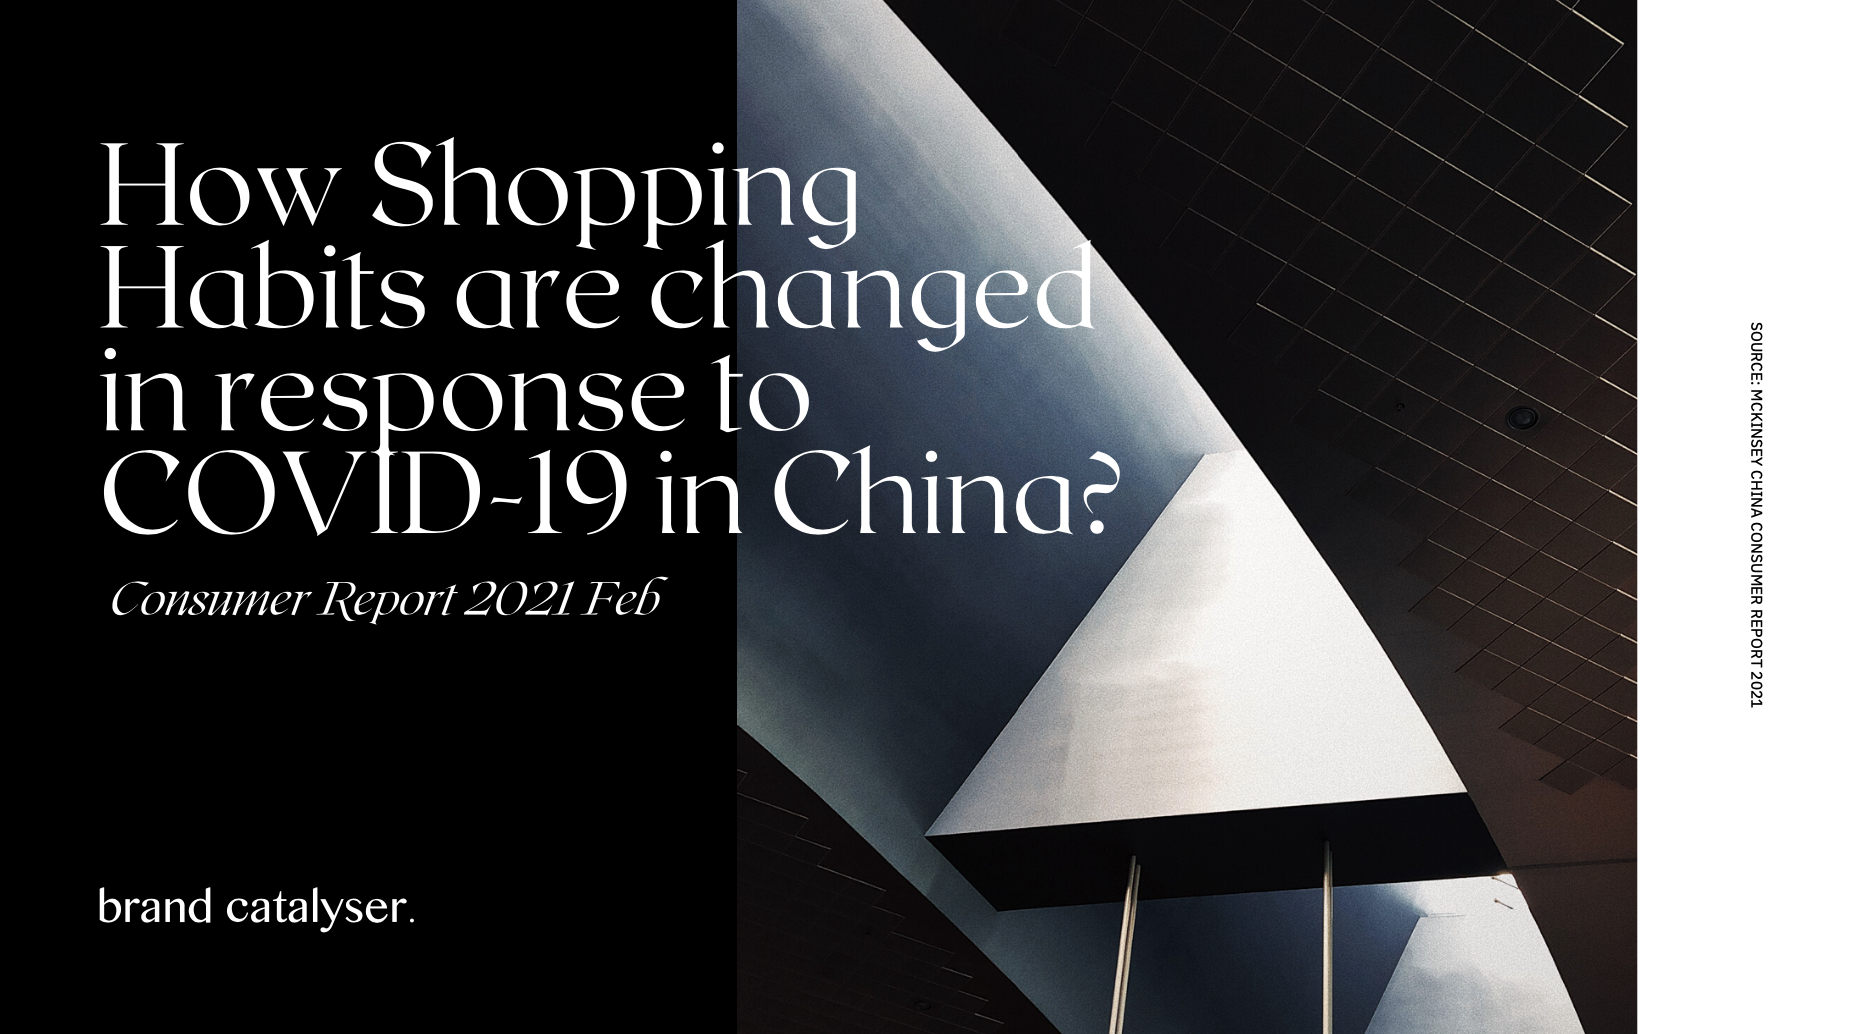 How shopping habits are changed in response to COVID-19 in China